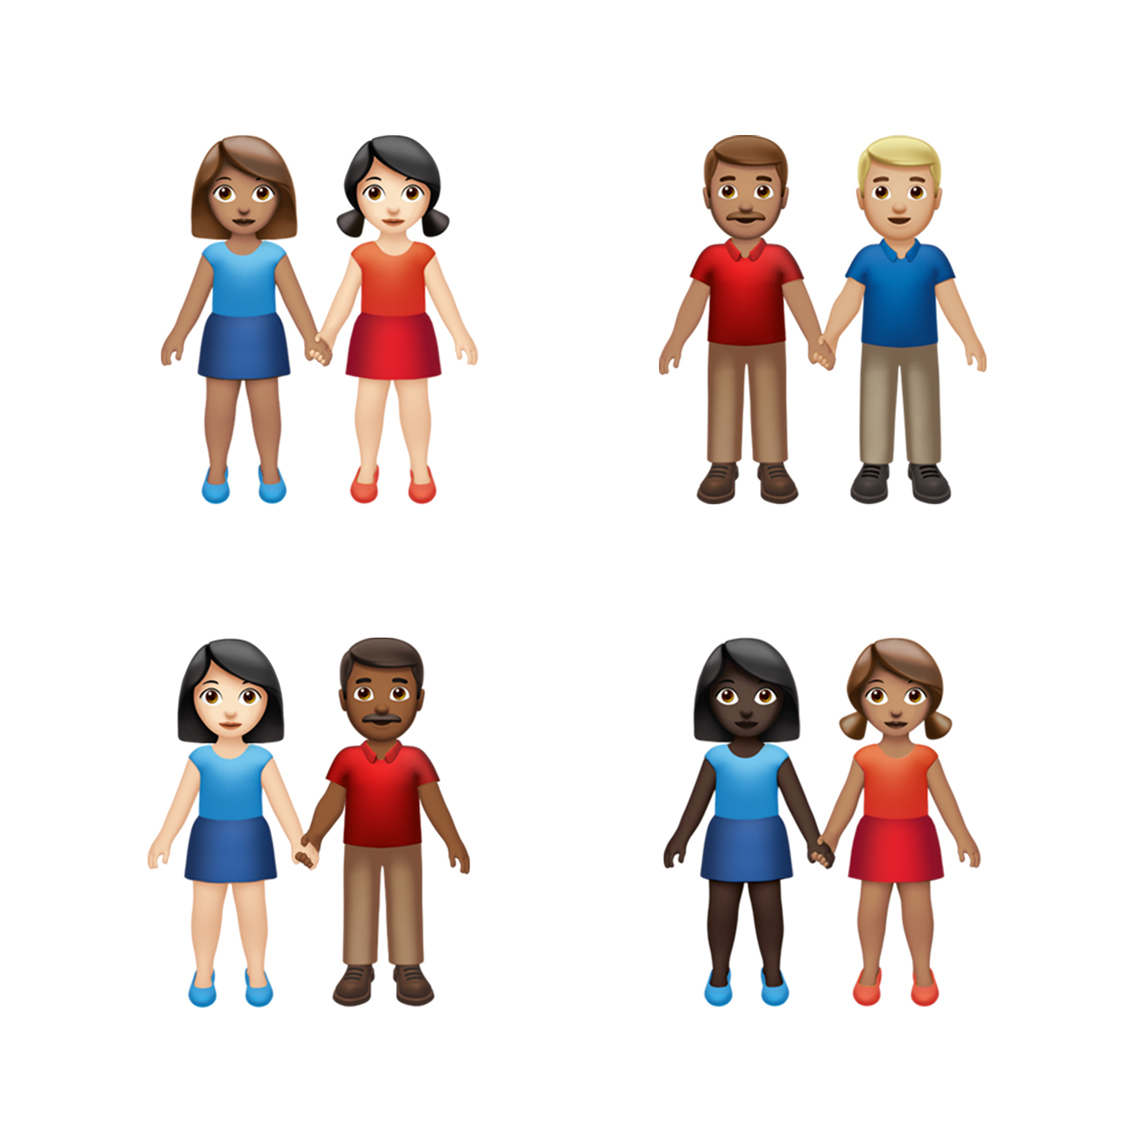 Apple Previews New Emoji Collections in Celebration of World Emoji Day